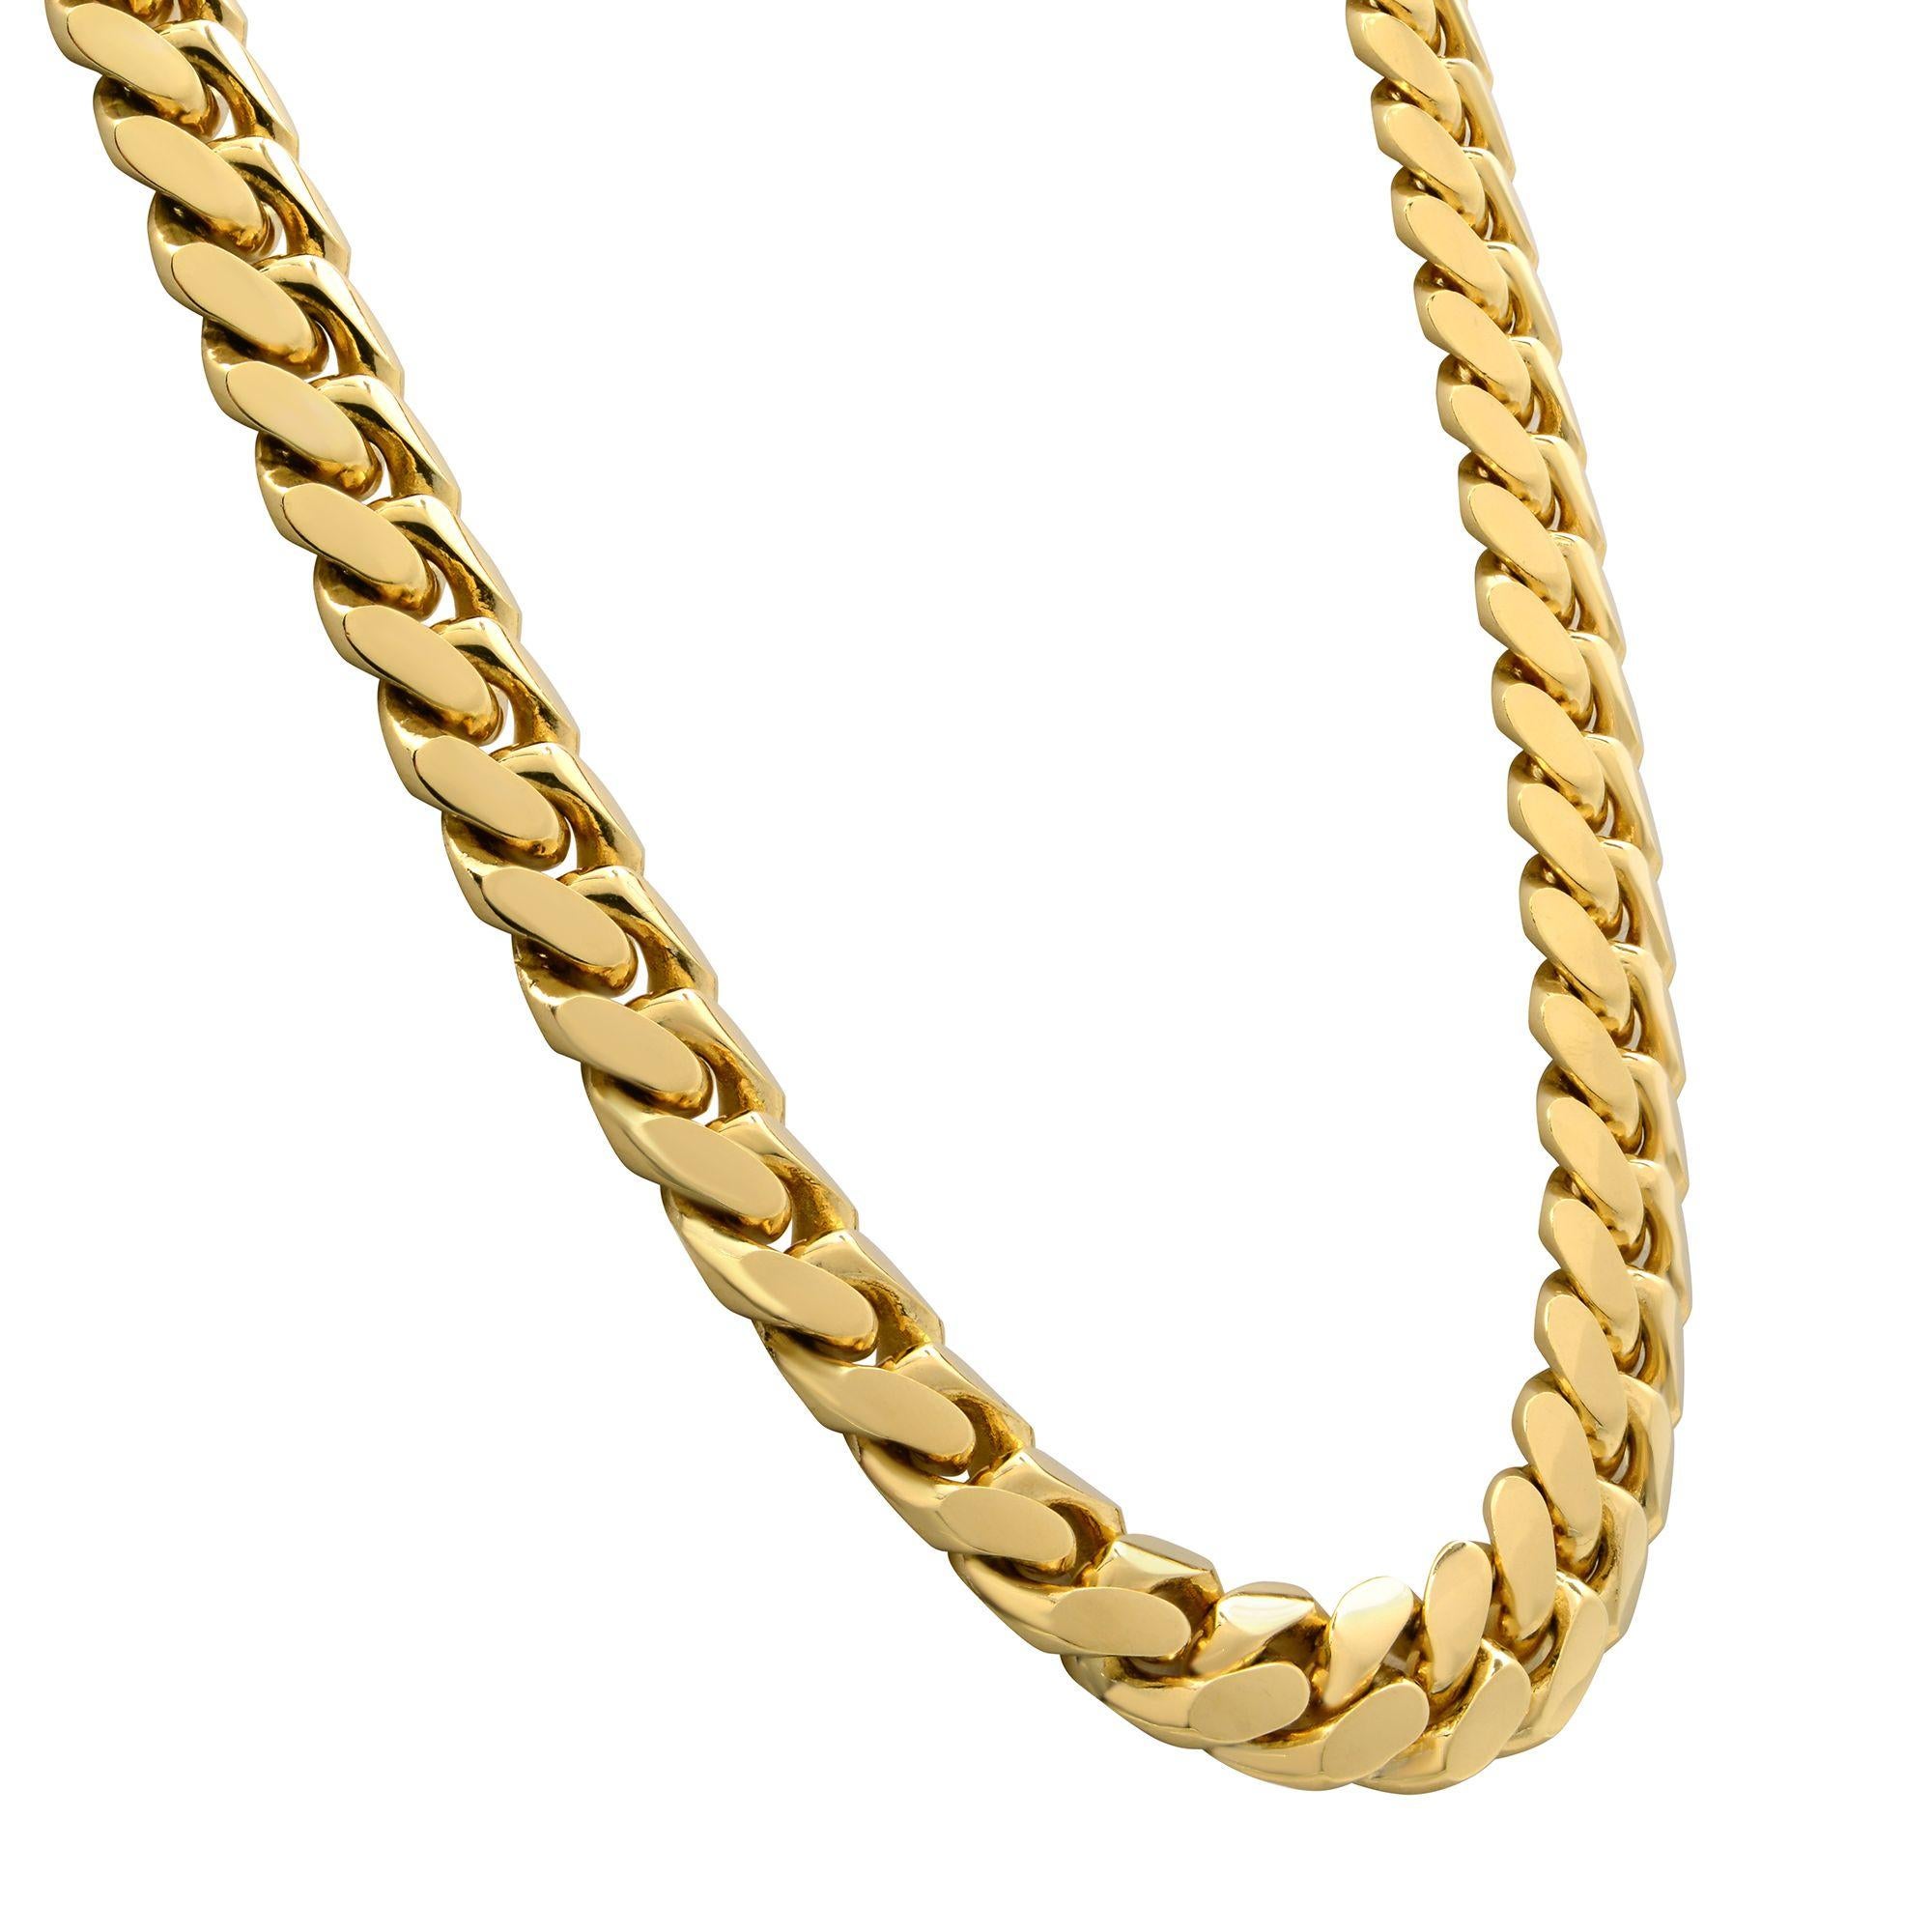 This classic Miami Cuban link chain is handcrafted in highly gleaming 14K yellow gold. Solid gold. The chain is 22 inches in length and 8mm in width. Weighing approximately 149 grams. This chain securely locks with a durable box clasp with two